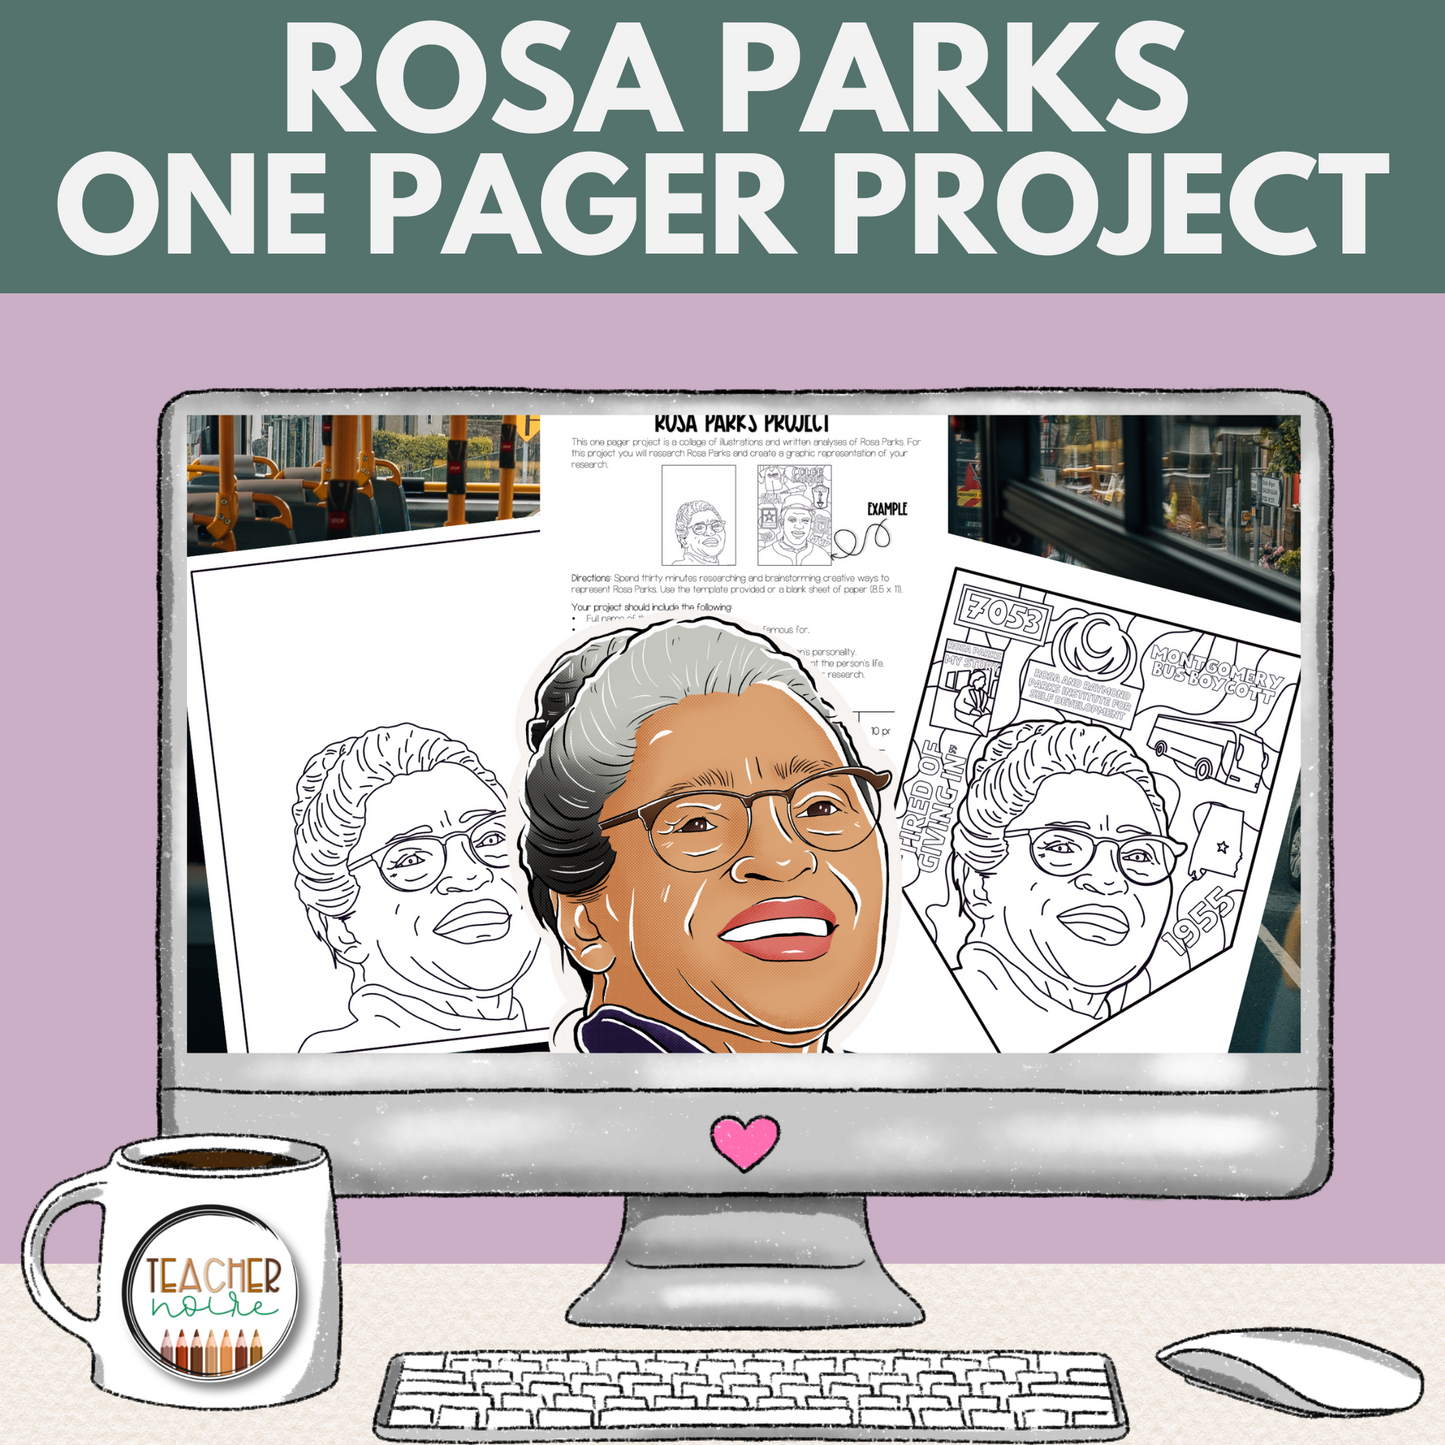 Rosa Parks One Pager Project